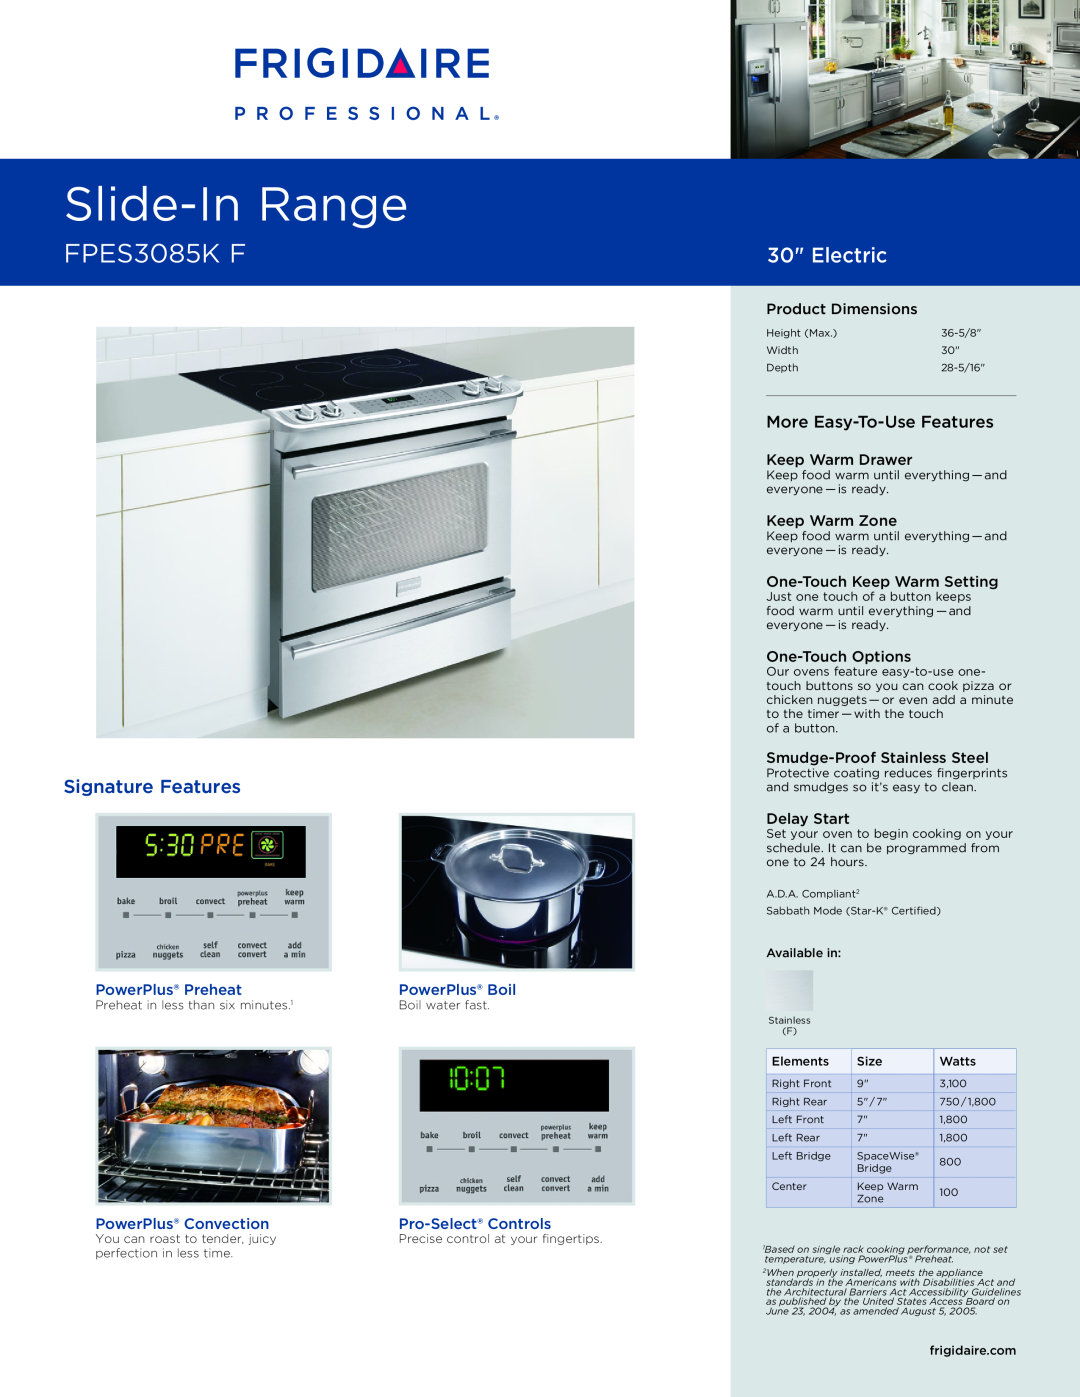 Frigidaire FPES3085K F dimensions Product Dimensions, Keep Warm Drawer, Keep Warm Zone, One-Touch Keep Warm Setting 